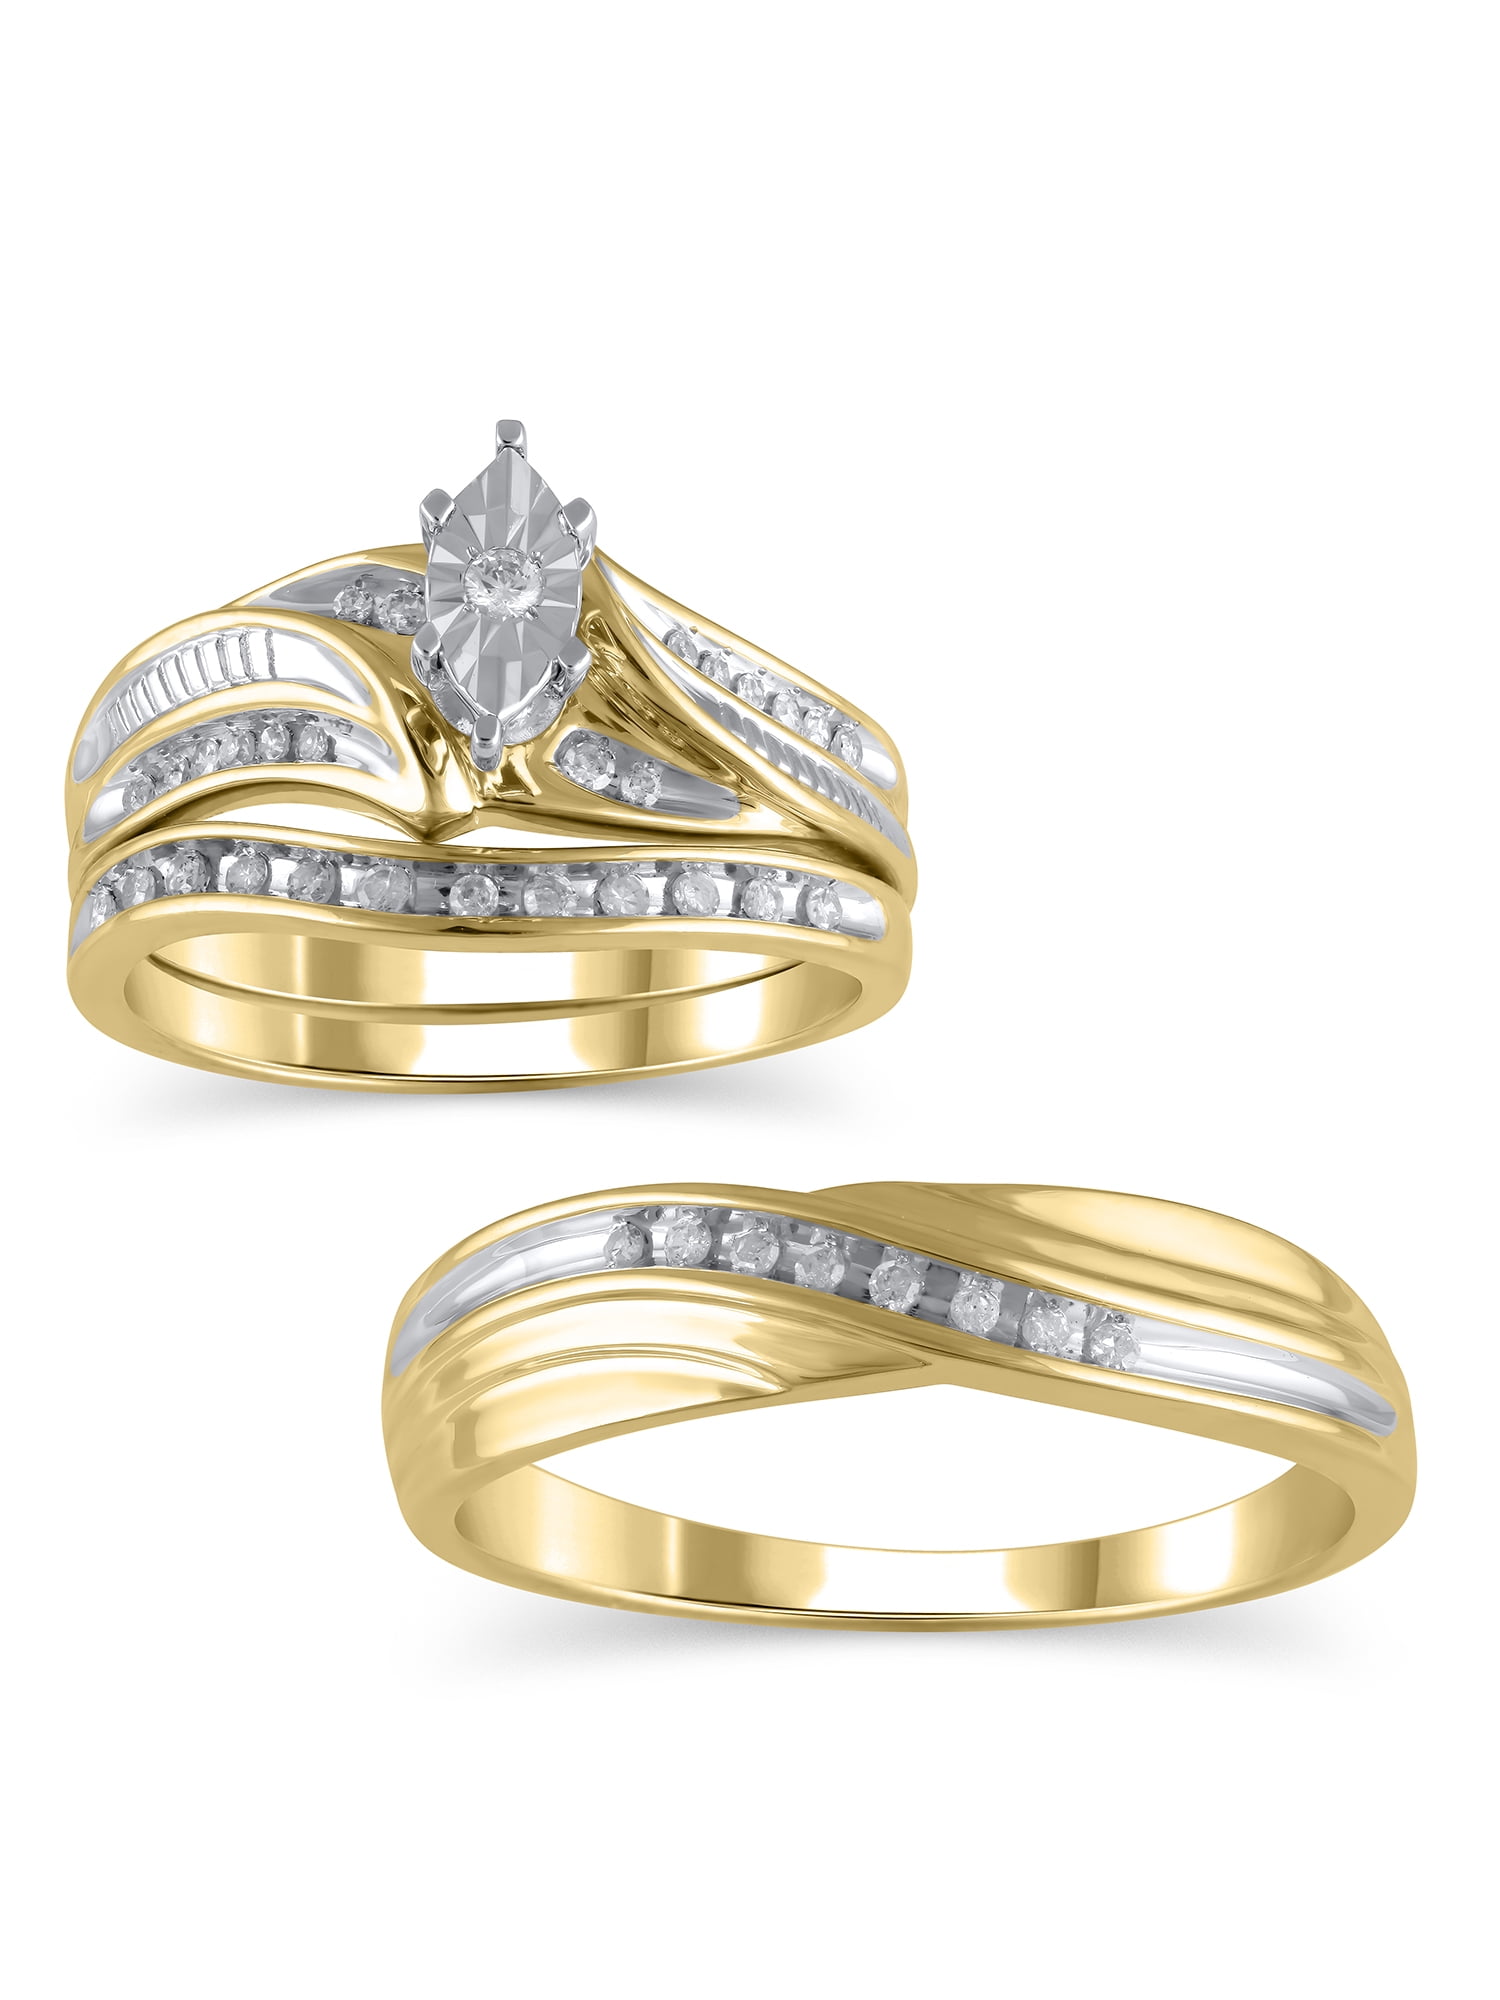 Solid Gold 10K Gold Wedding Band Set For Him and Her 